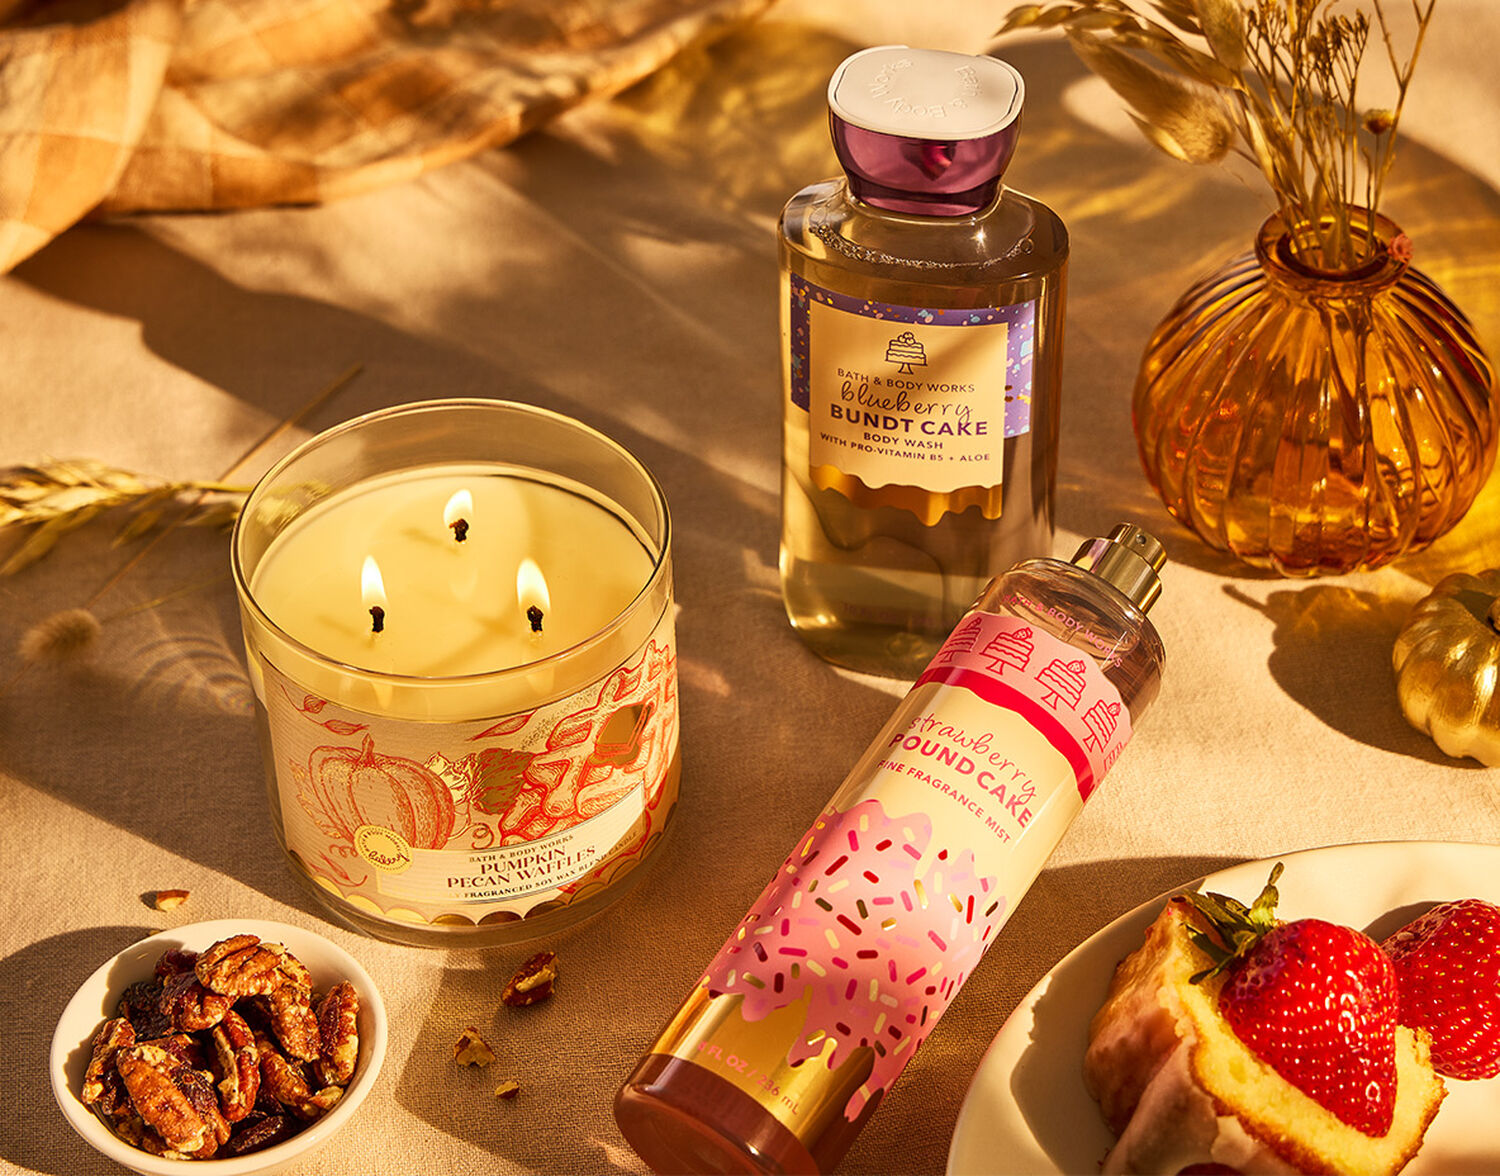 Looks like fall preview Sneak a peek at scents that take you from summer passions to autumn romances.